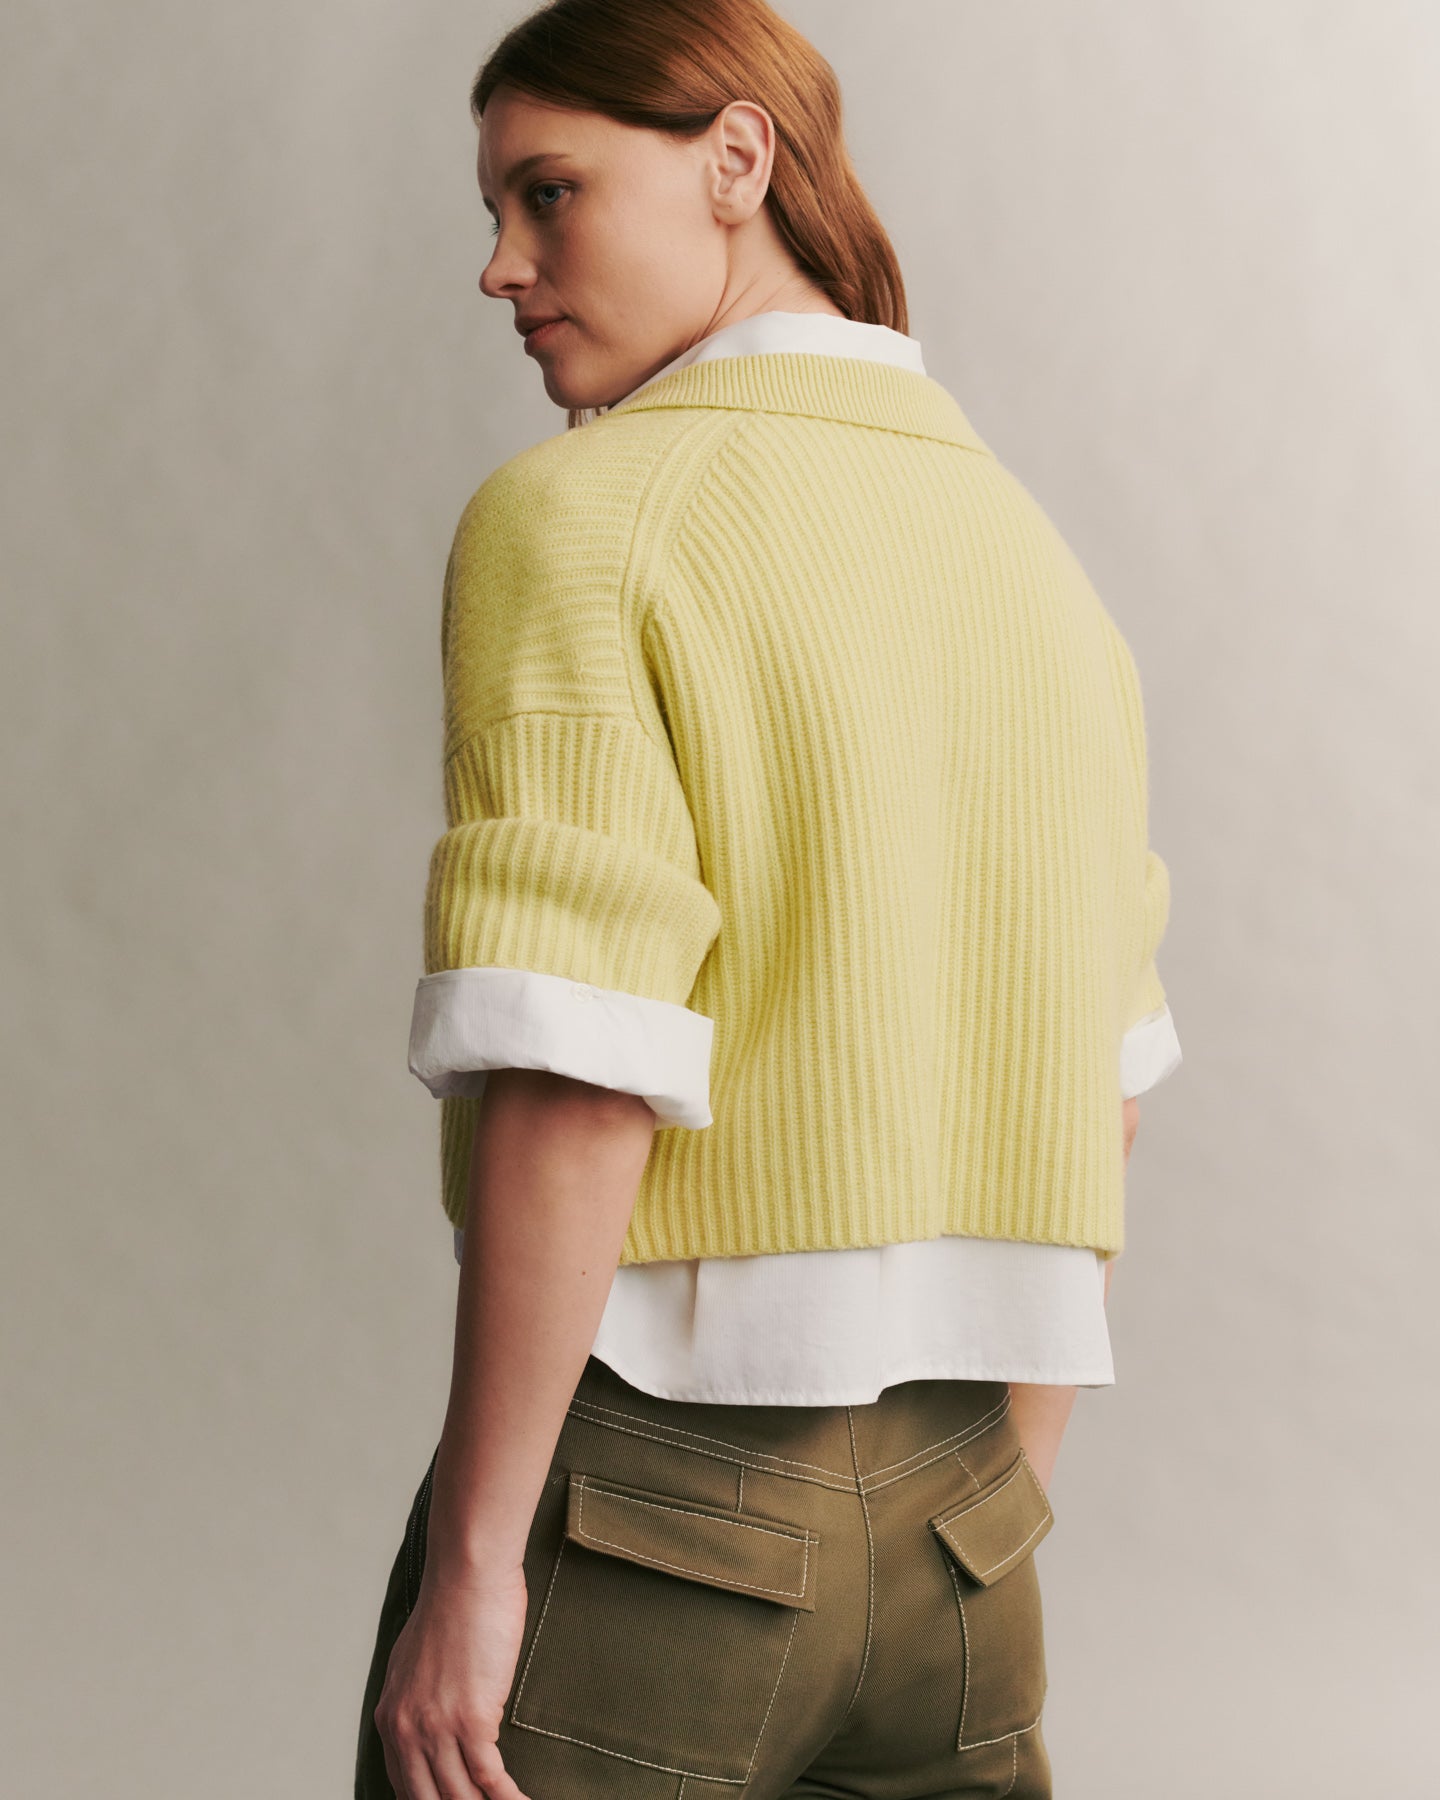 TWP Charlock Tallulah Sweater in Cashmere view 5